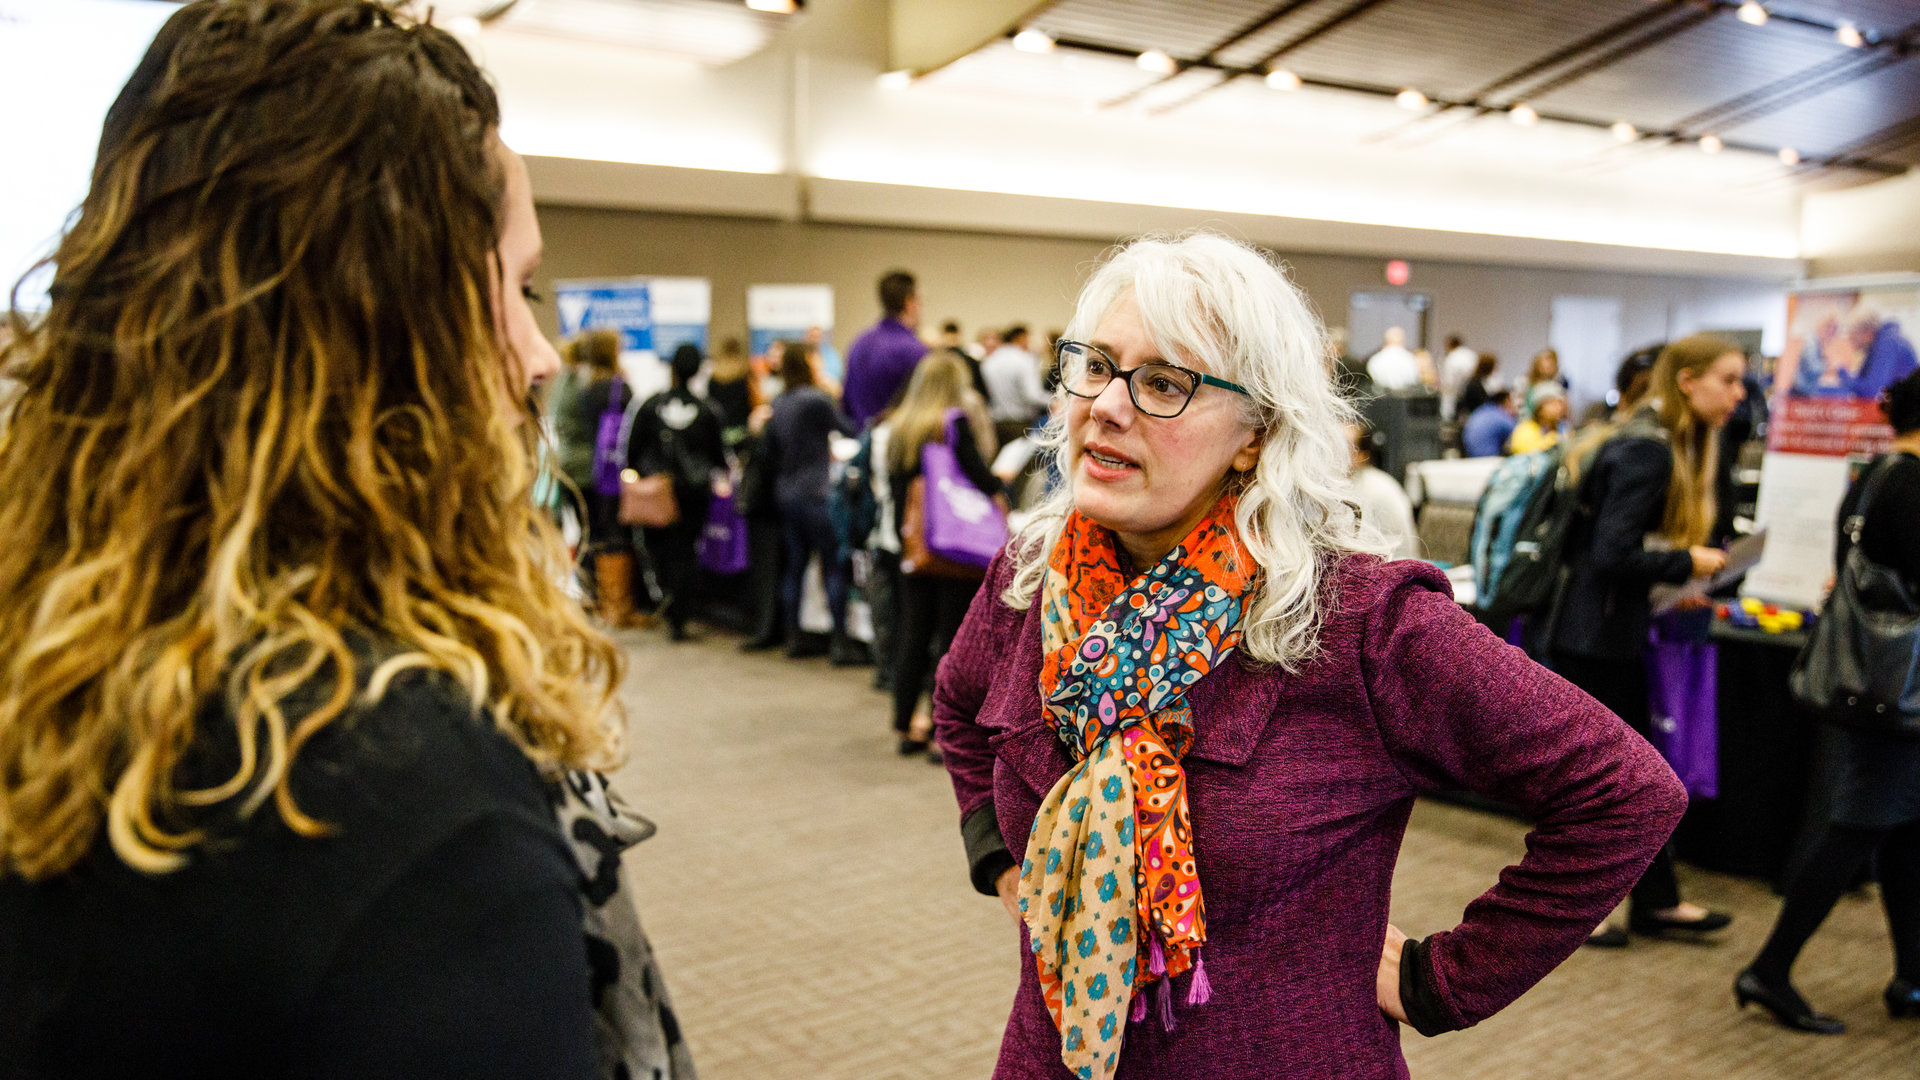 Student talking with professor during networking event